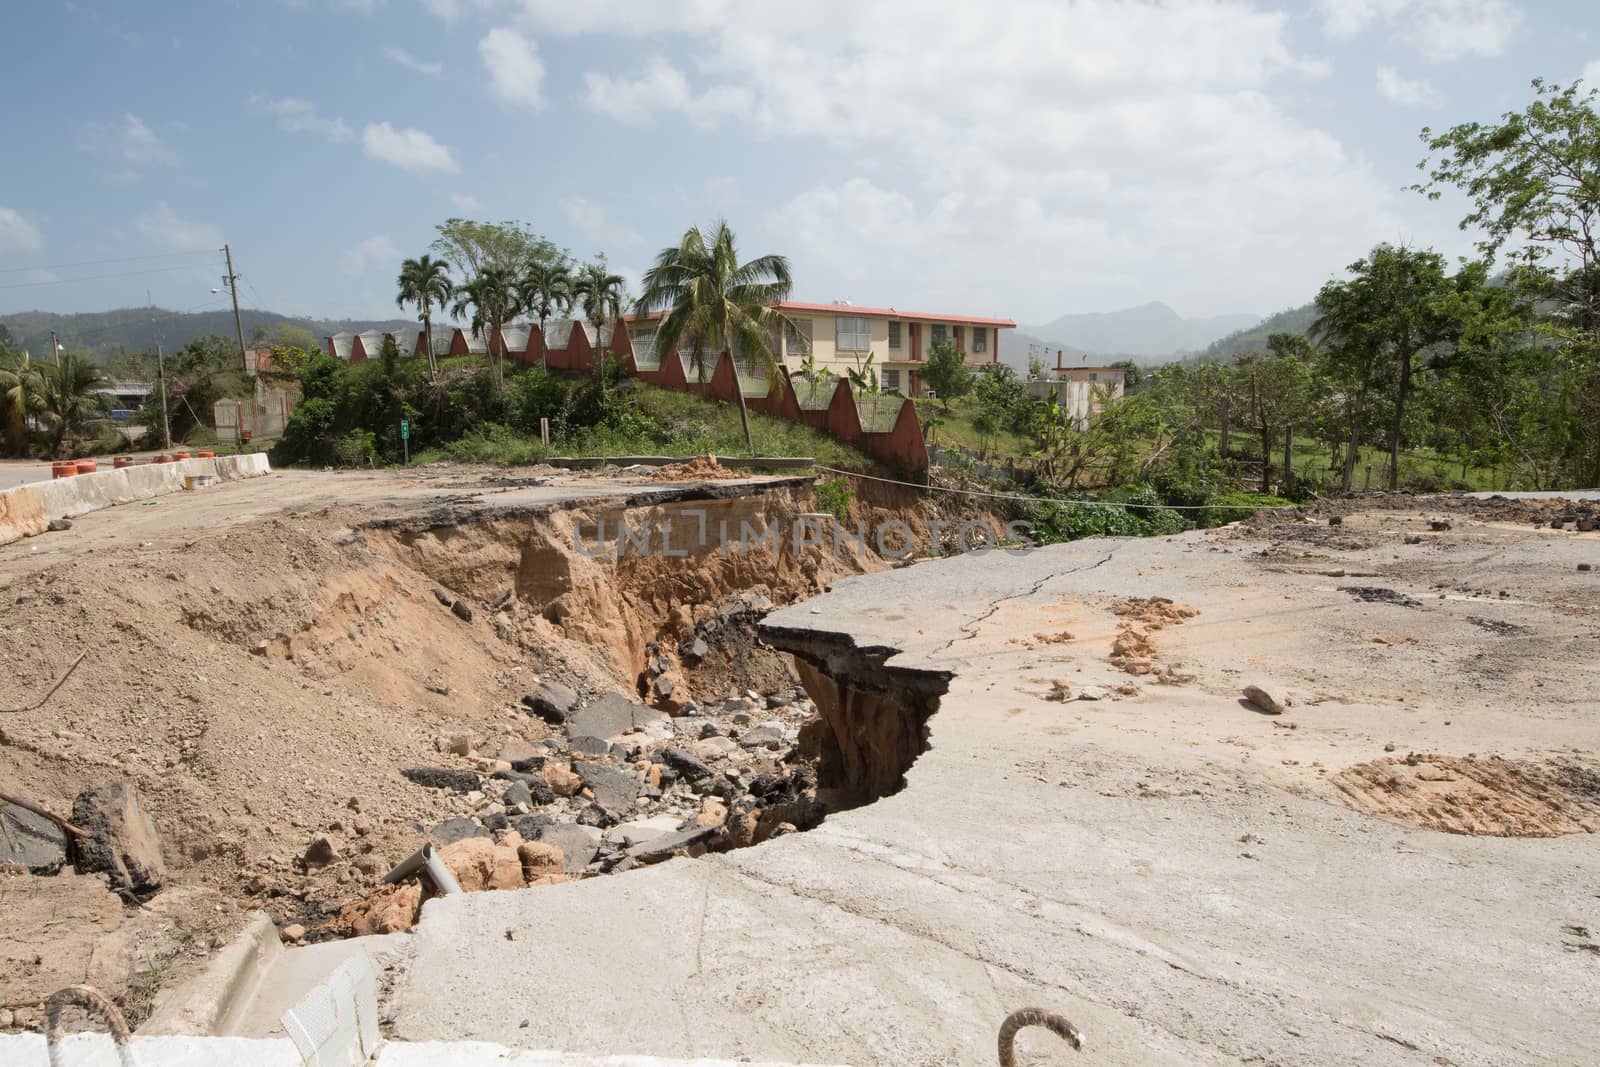 Many roads were destroyed by Hurricane Maria in September, 2017 and by the resulting flooding and soil saturation.